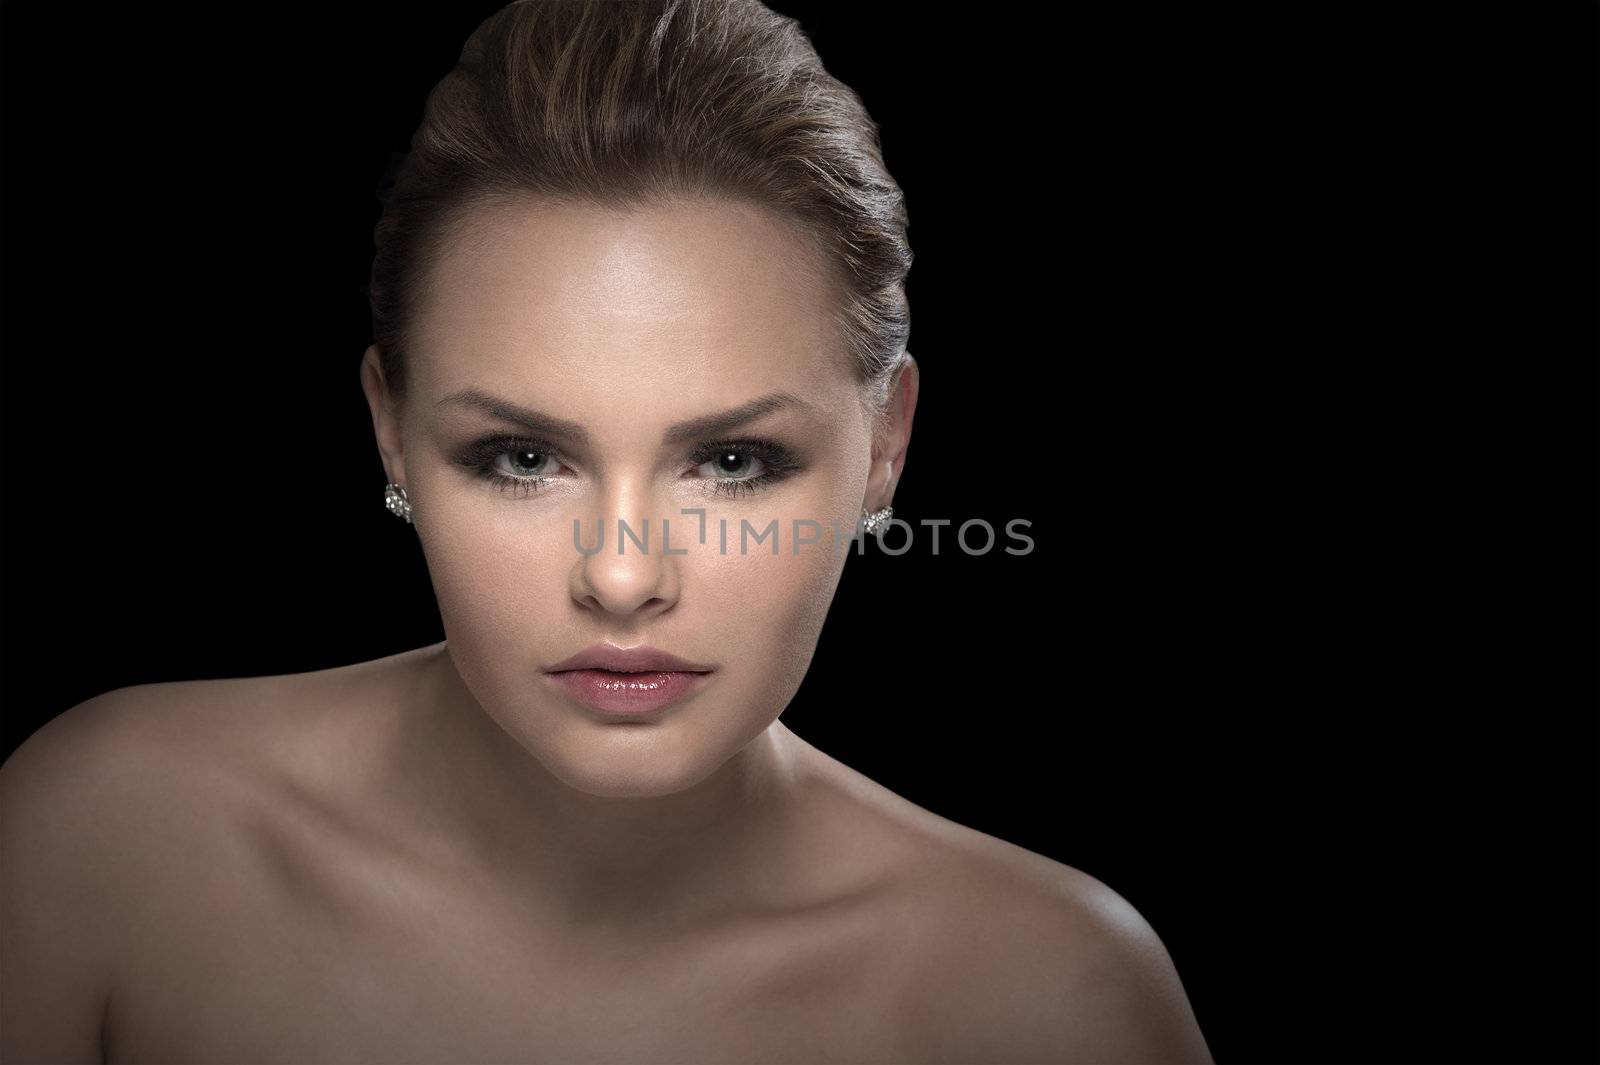 Studio portrait of a beautiful serious intense young woman with bare shoulders looking directly at the camera against a dark background with copy space